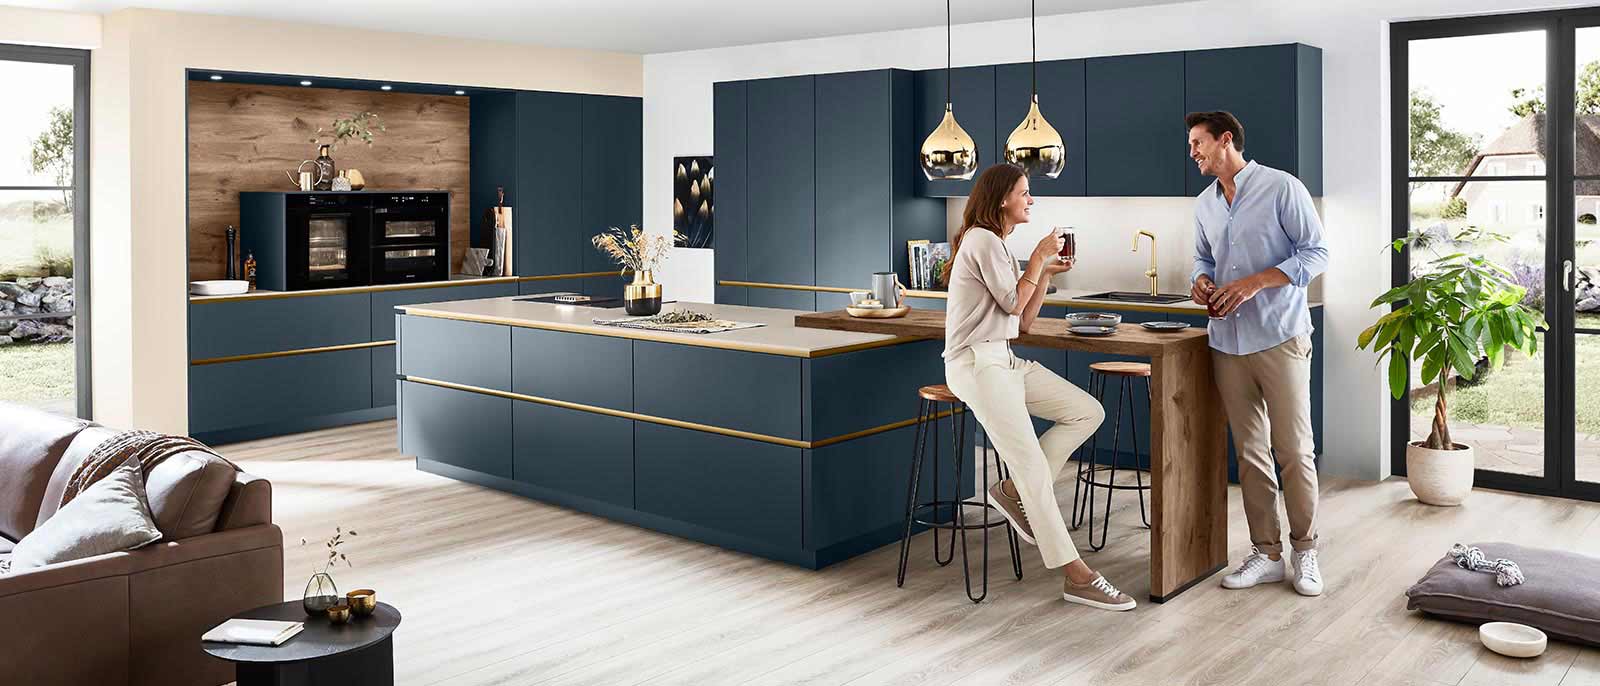 Modern Kitchen Design for a New Experience – Nobilia Kitchens